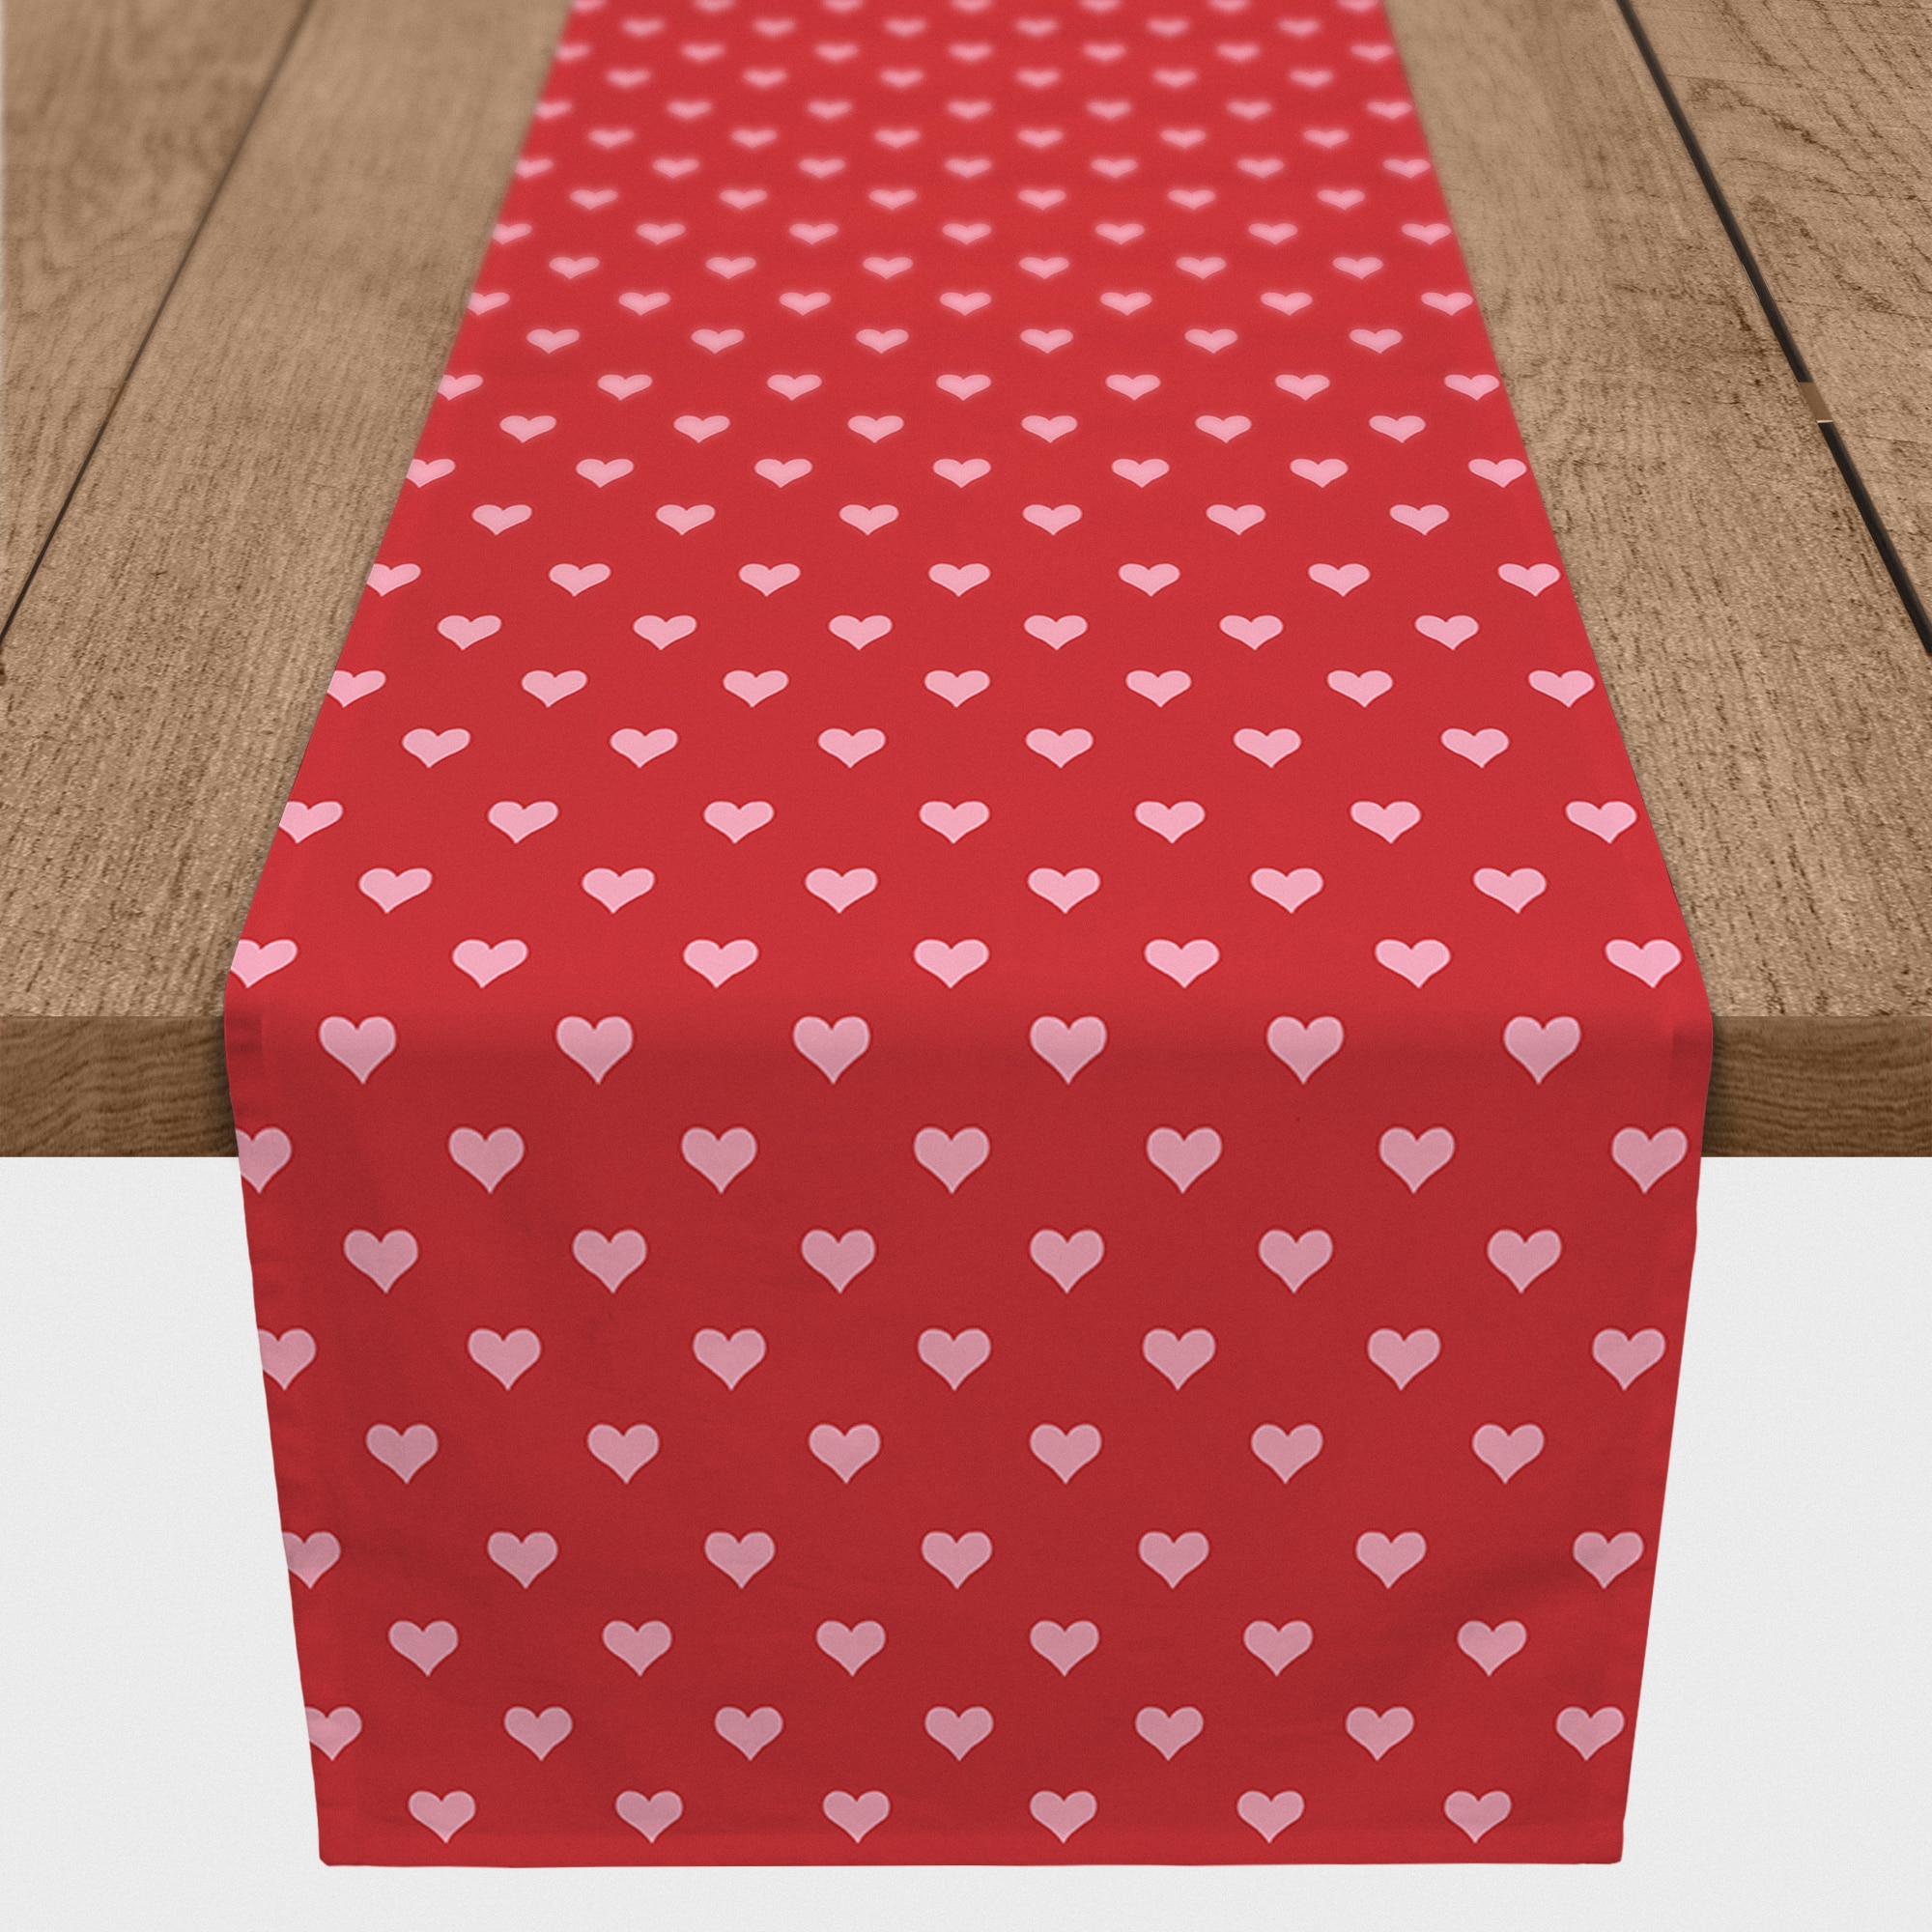 2CFun Valentine's Day Table Runner and Placemats- Red, Set of 5 1pc Lace Heart Table Runner and 4 Pcs Lace Table Placemats for Valentines Table Decorations